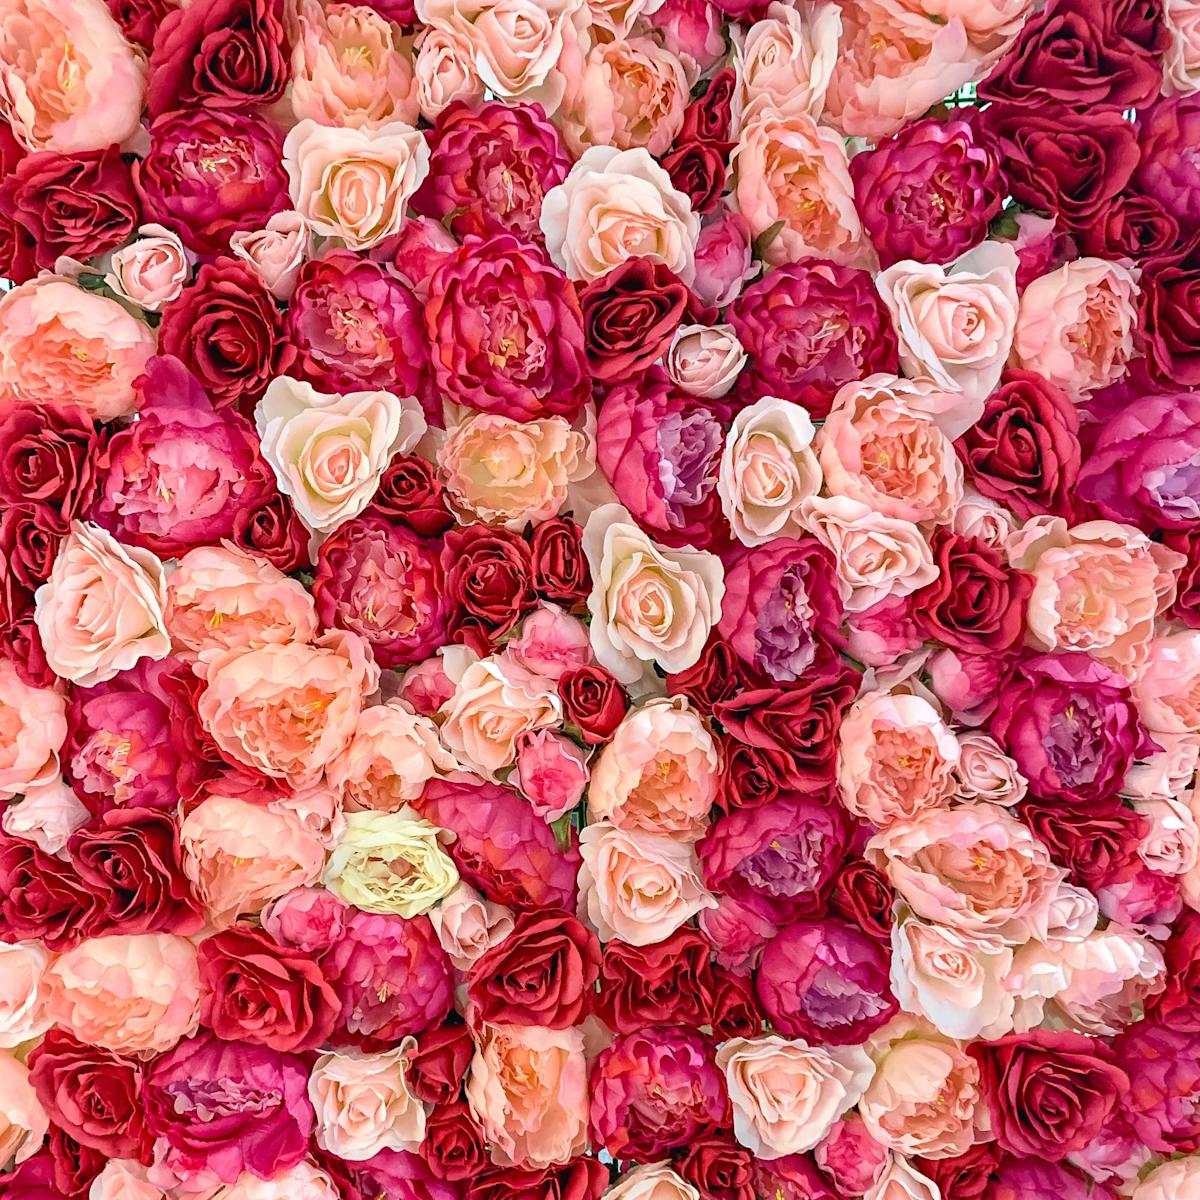 Pink Rose Iphone Wallpapers